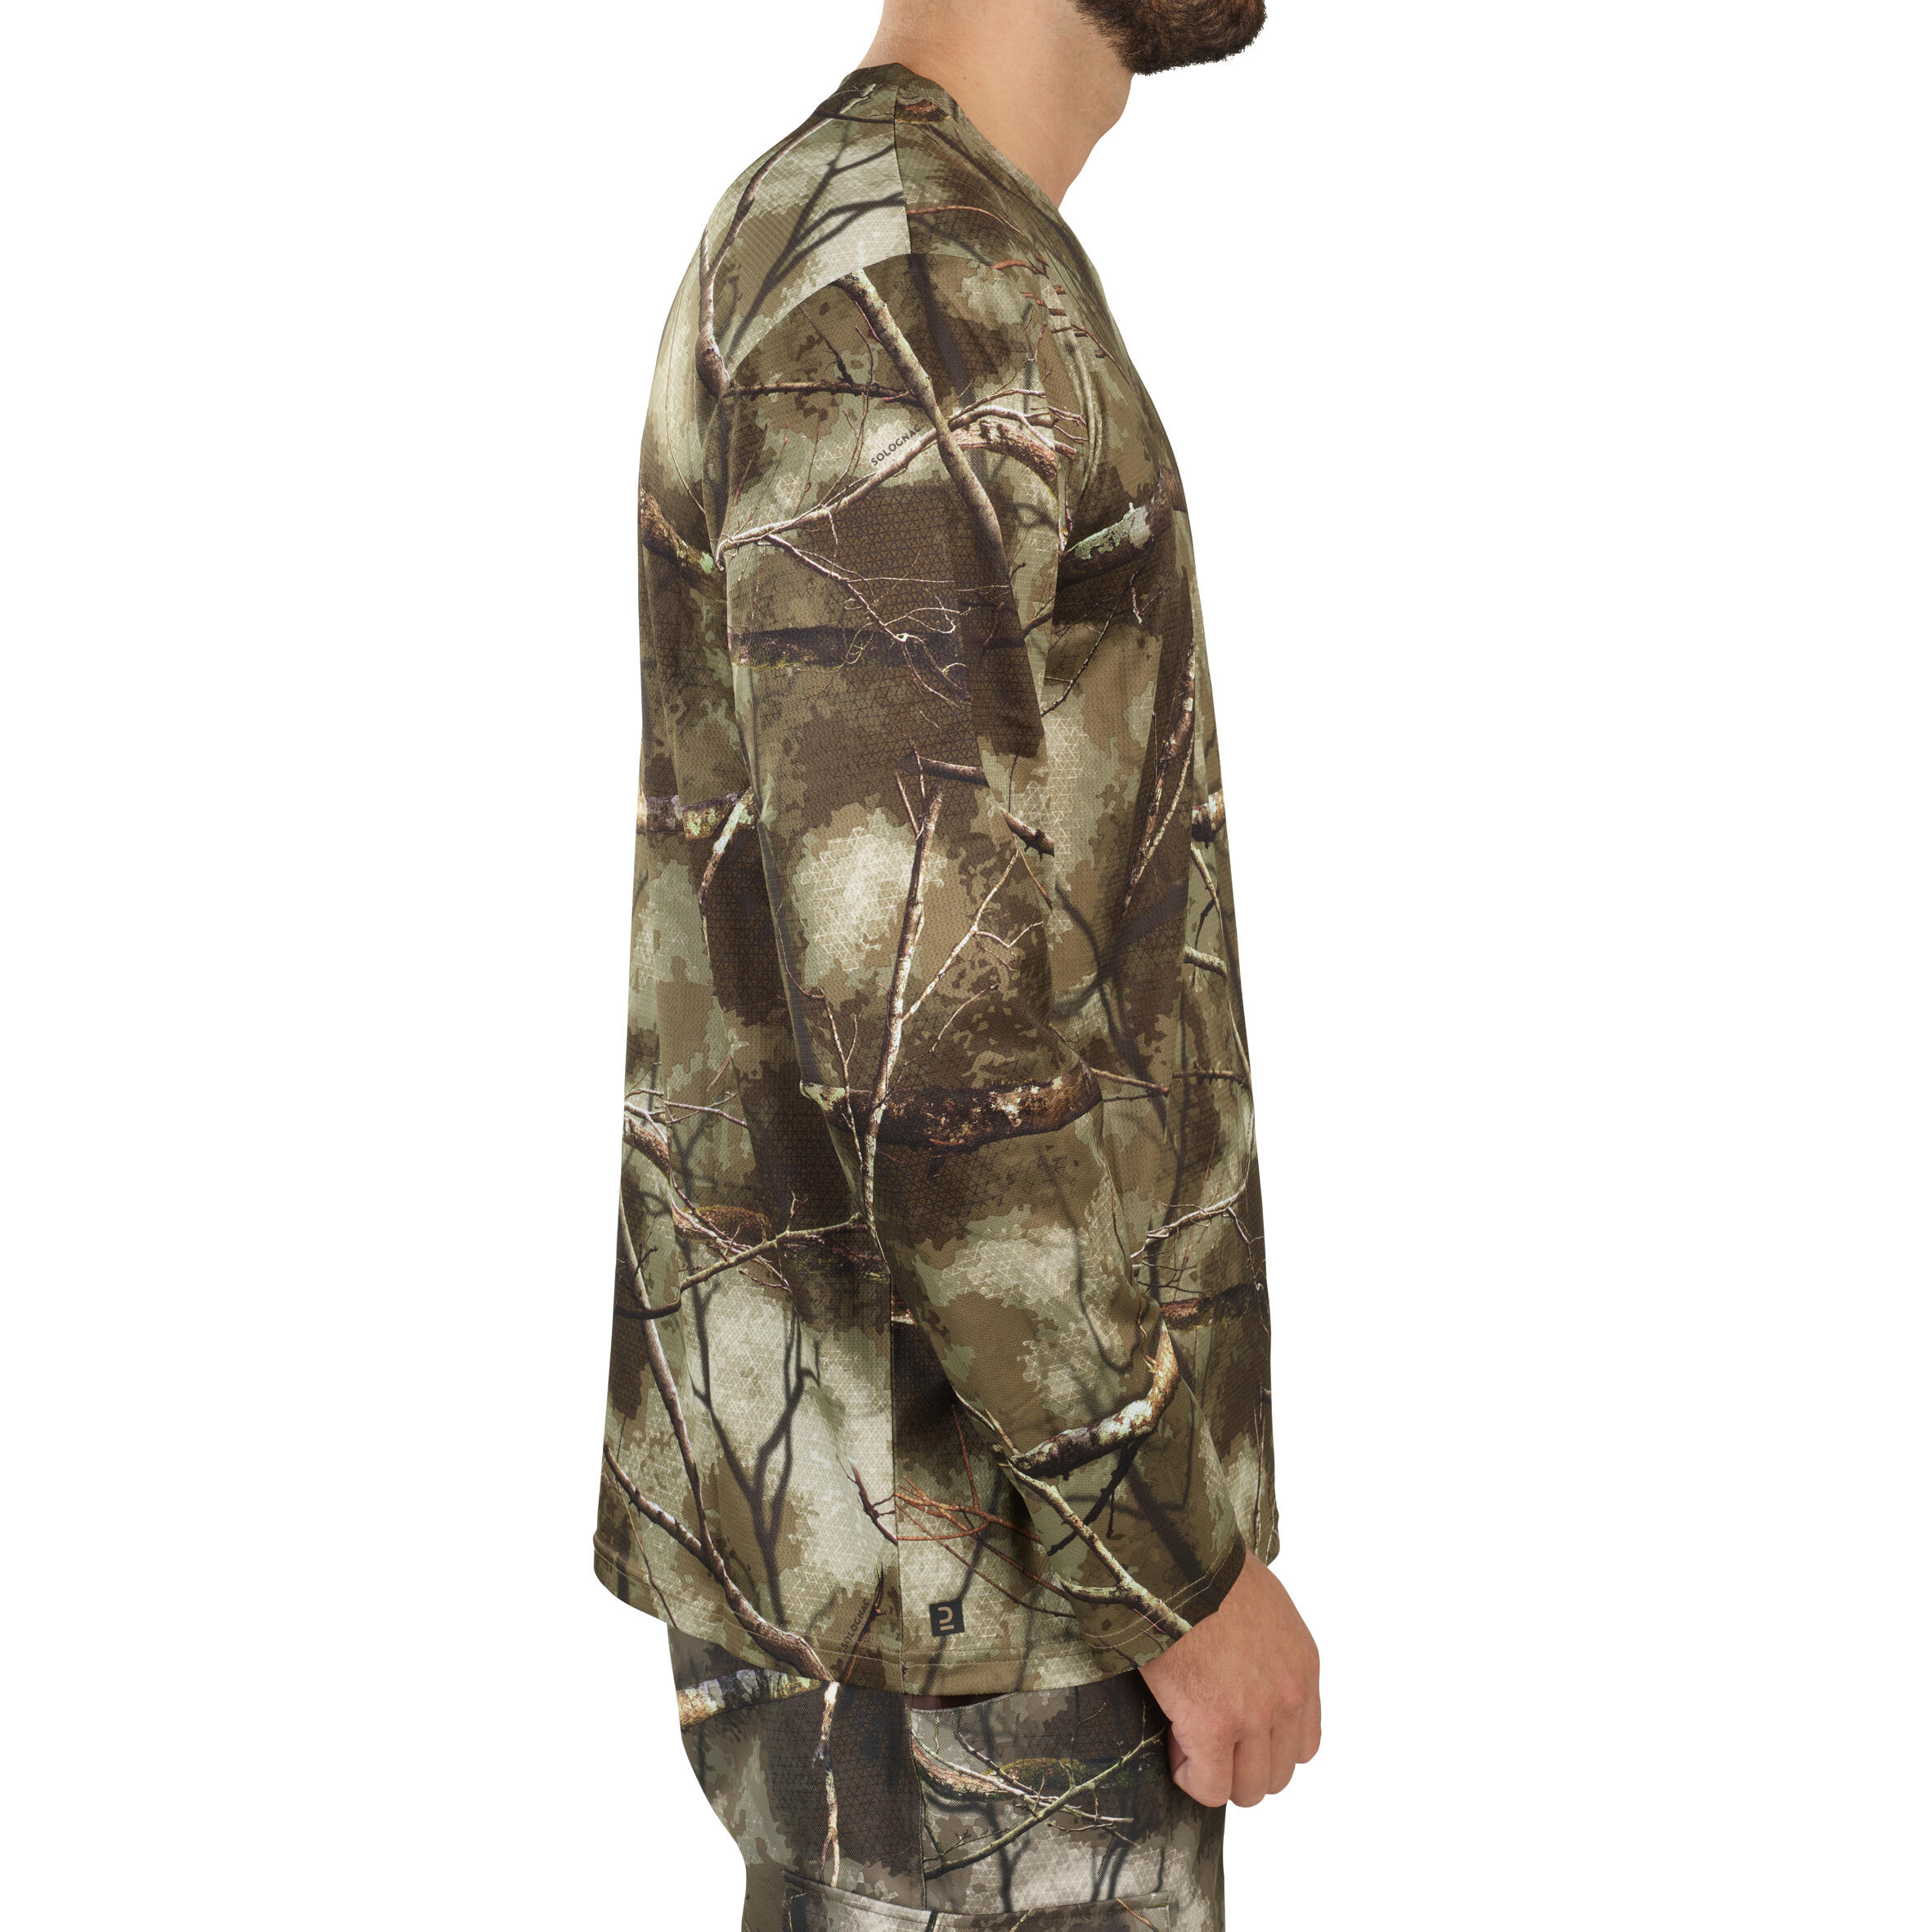 Short-Sleeved Breathable Hunting T-shirt – Treemetic 100 Camouflage -  Camouflage - Solognac - Decathlon